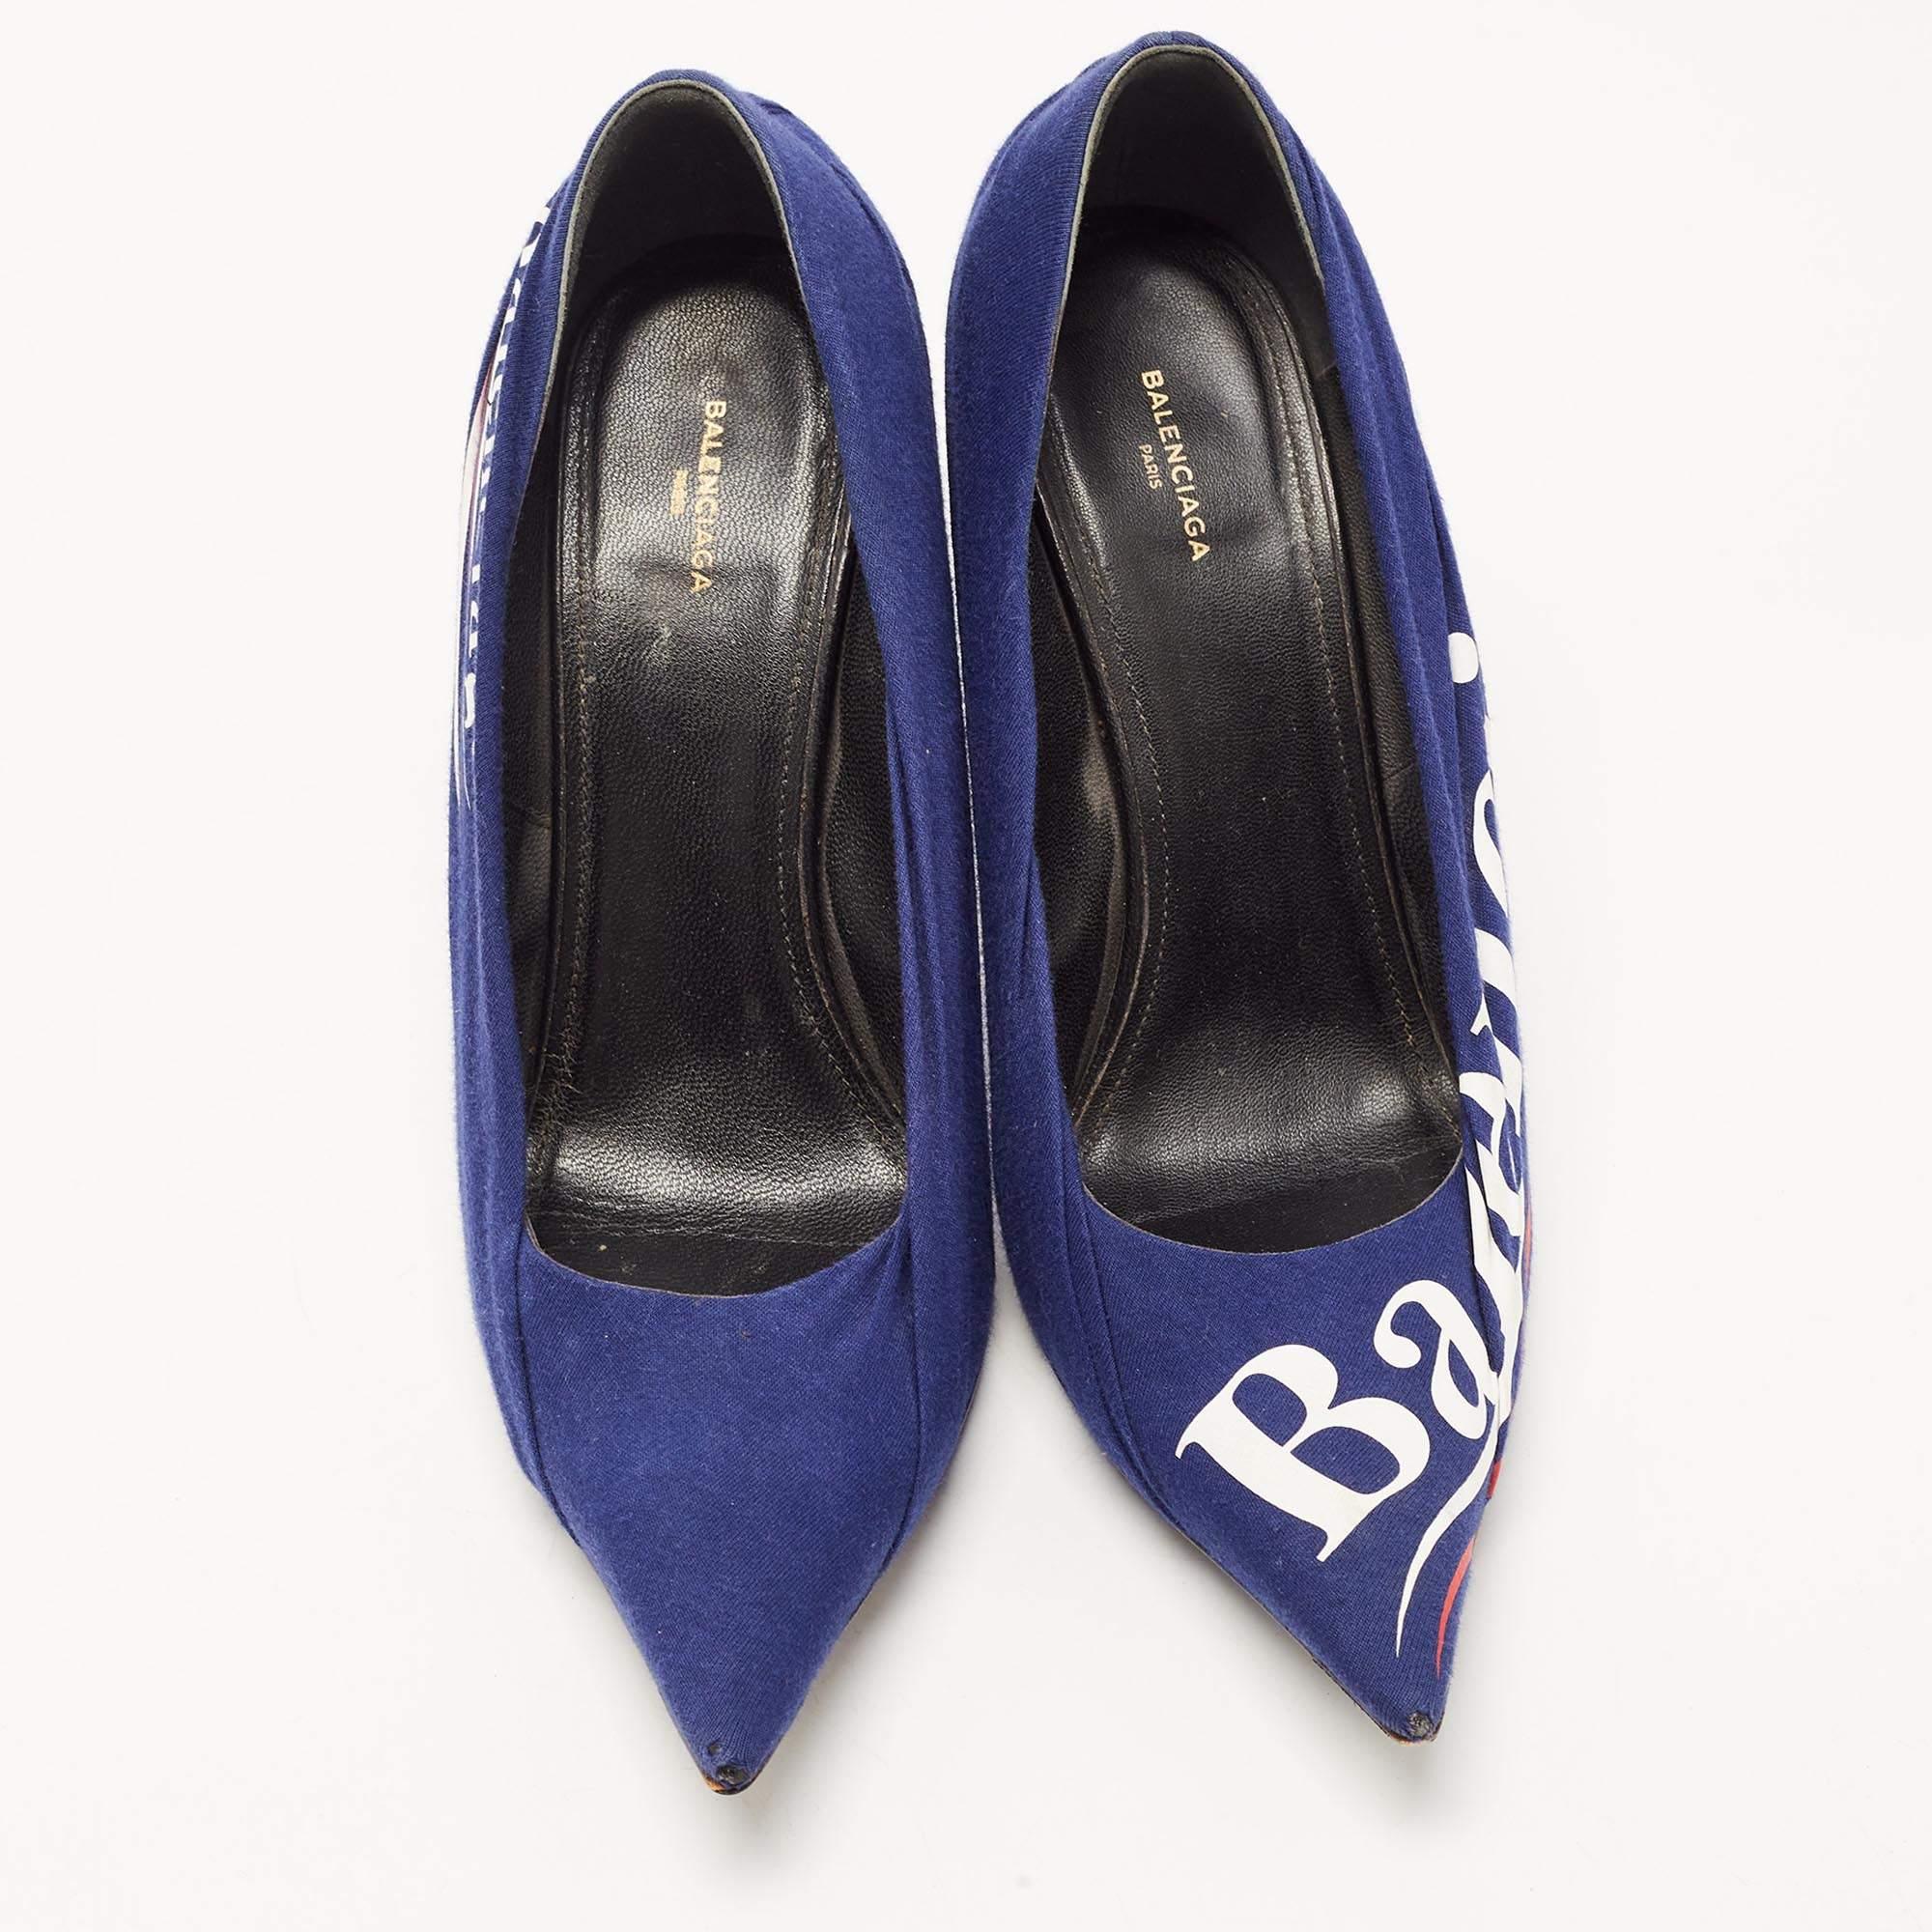 Exhibit an elegant style with this pair of Balenciaga pumps. These designer pumps are crafted from quality materials. They are set on durable soles and high heels.

